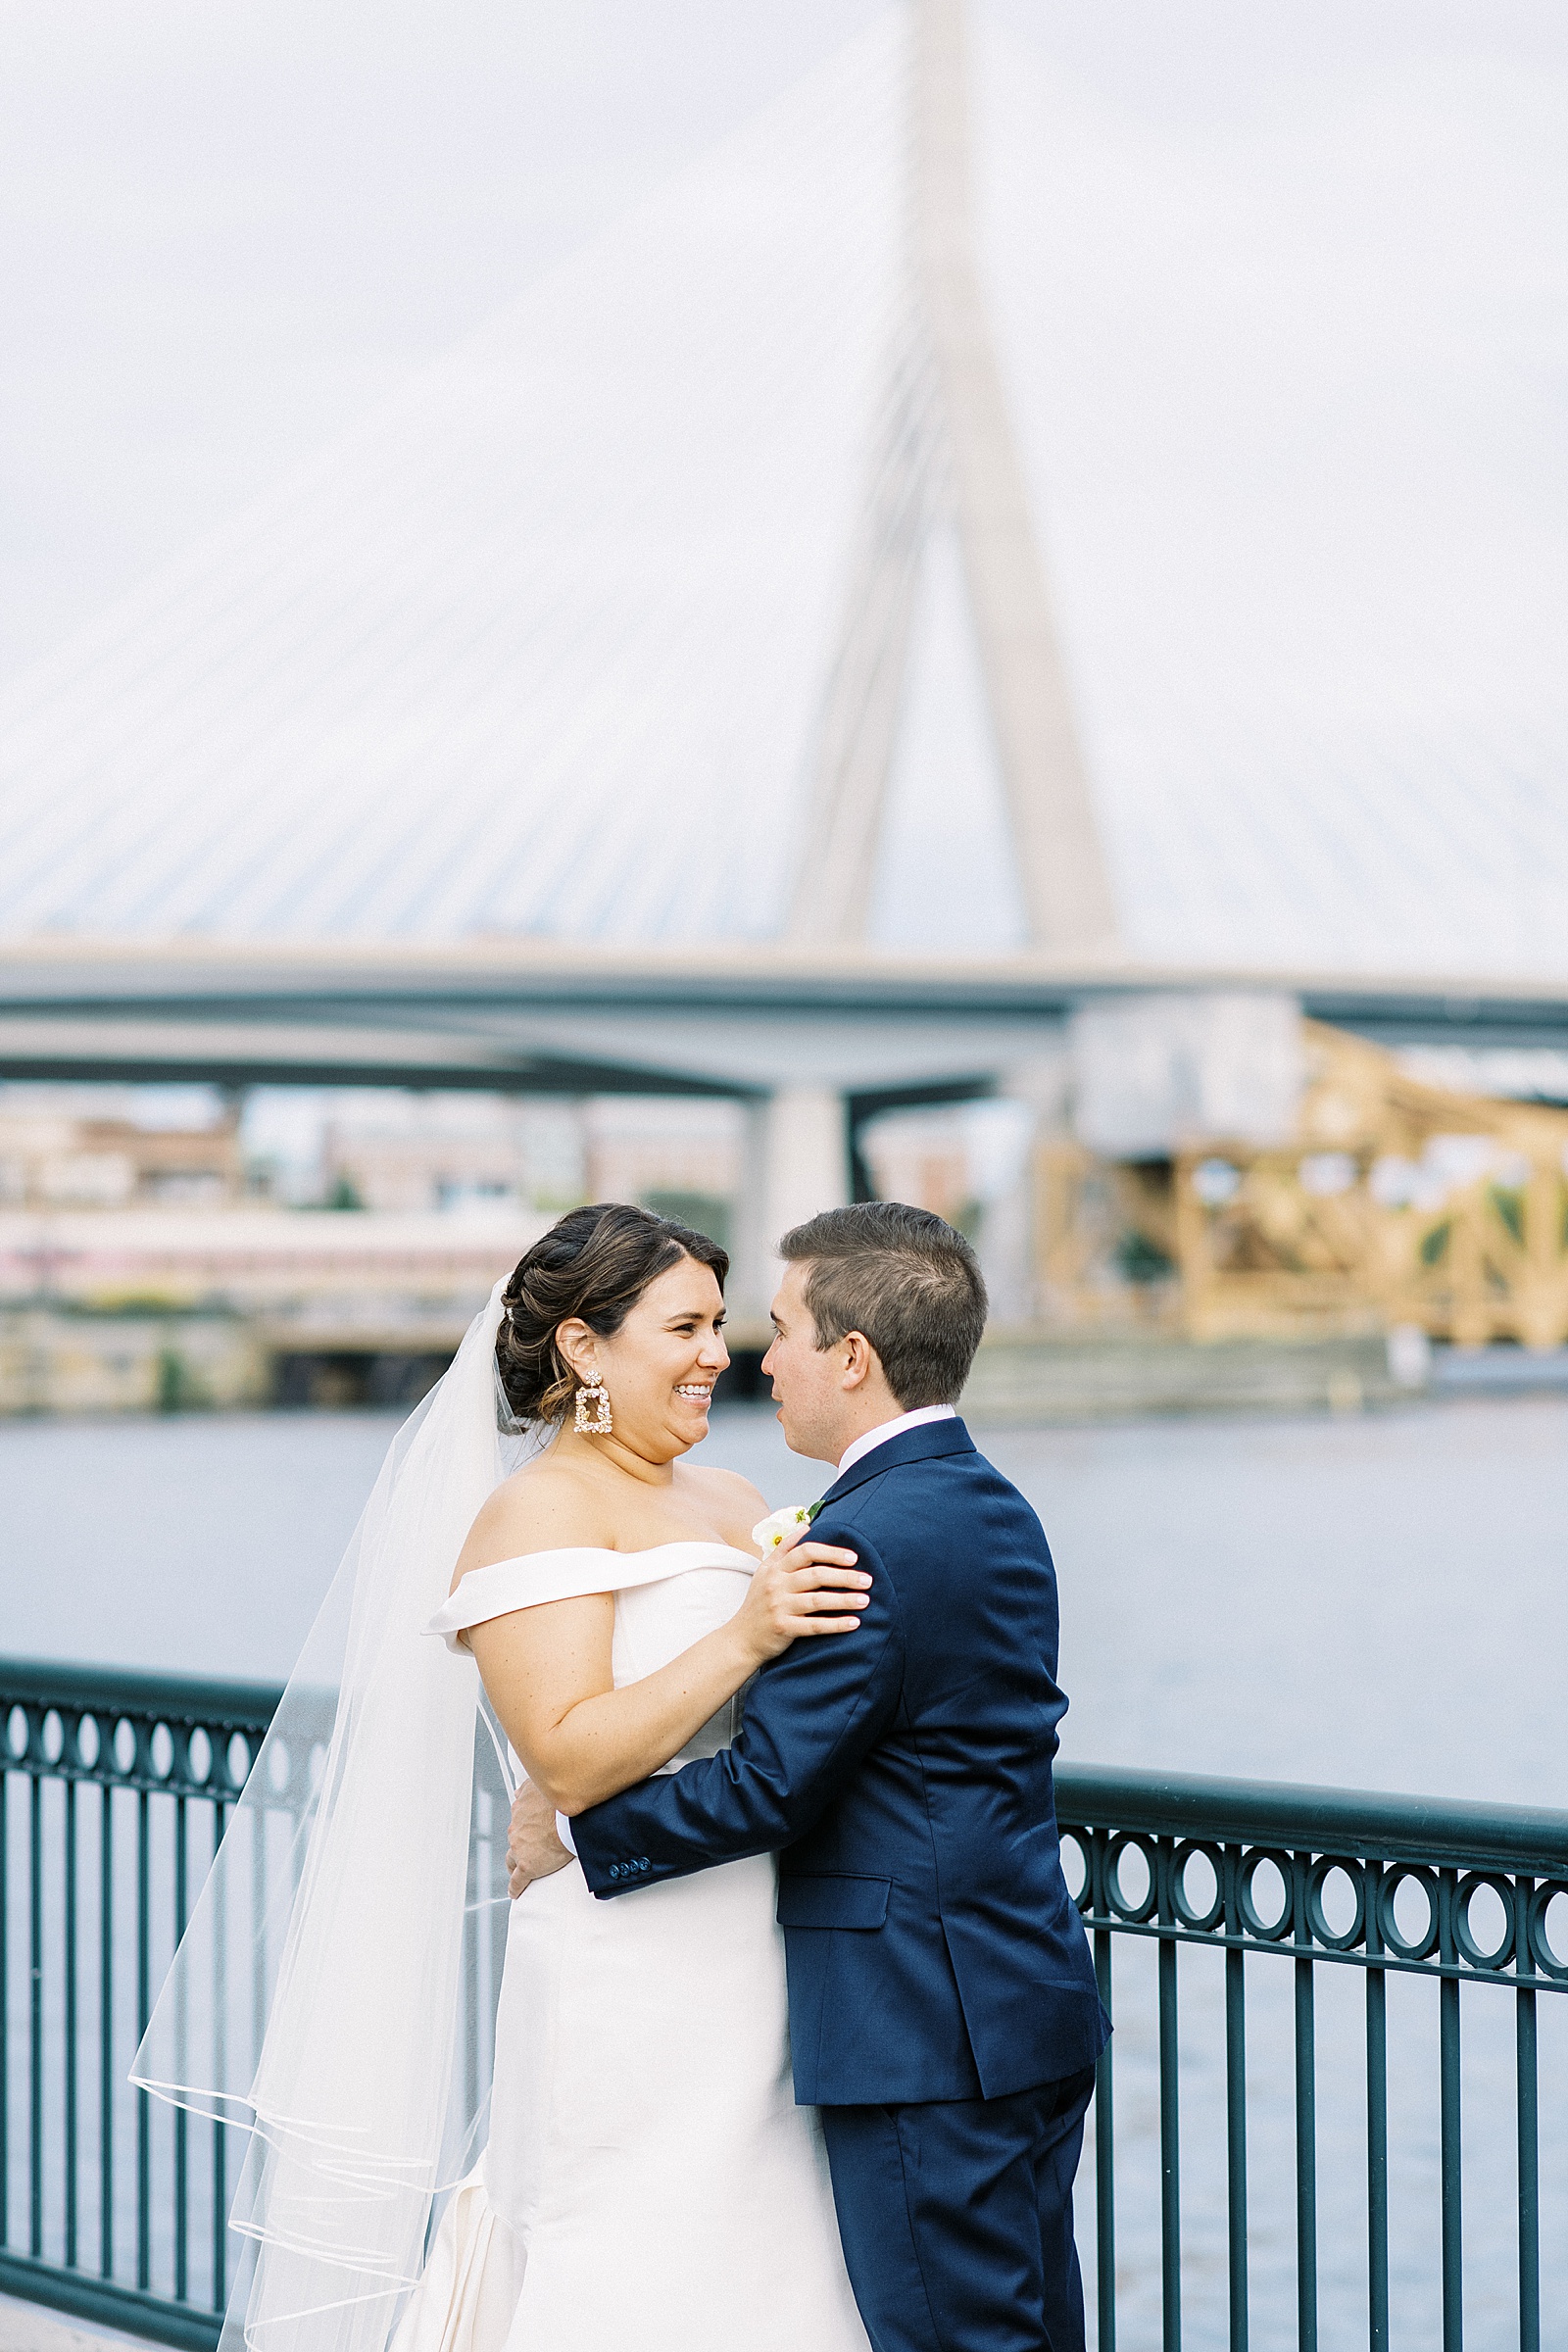 Bride and groom embracing in front of a bridge by New York wedding photographer